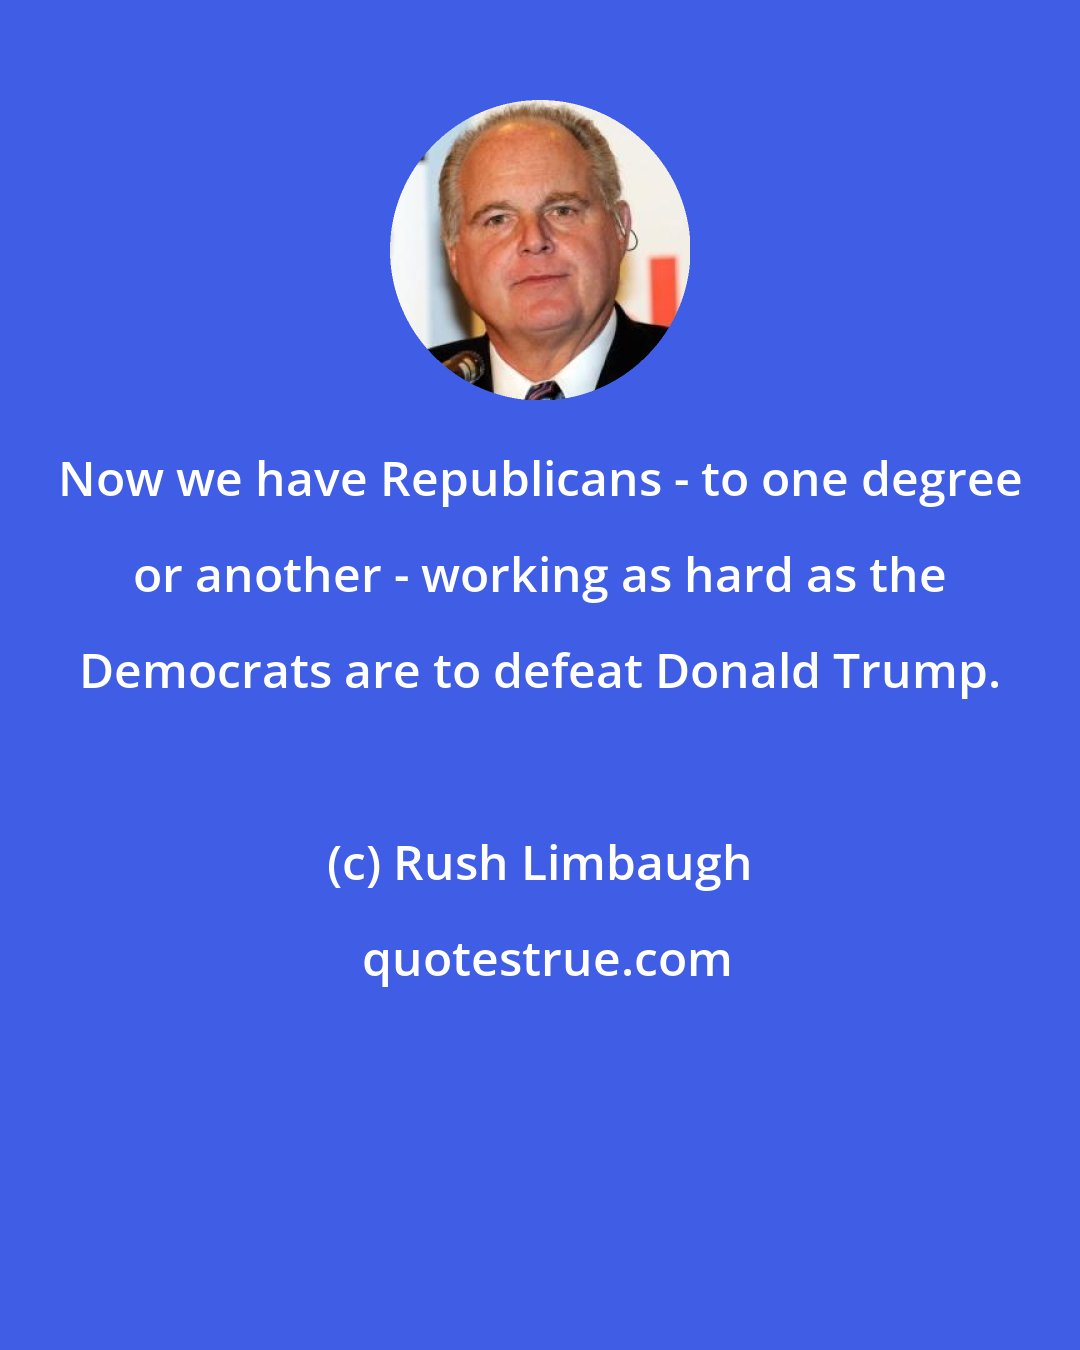 Rush Limbaugh: Now we have Republicans - to one degree or another - working as hard as the Democrats are to defeat Donald Trump.